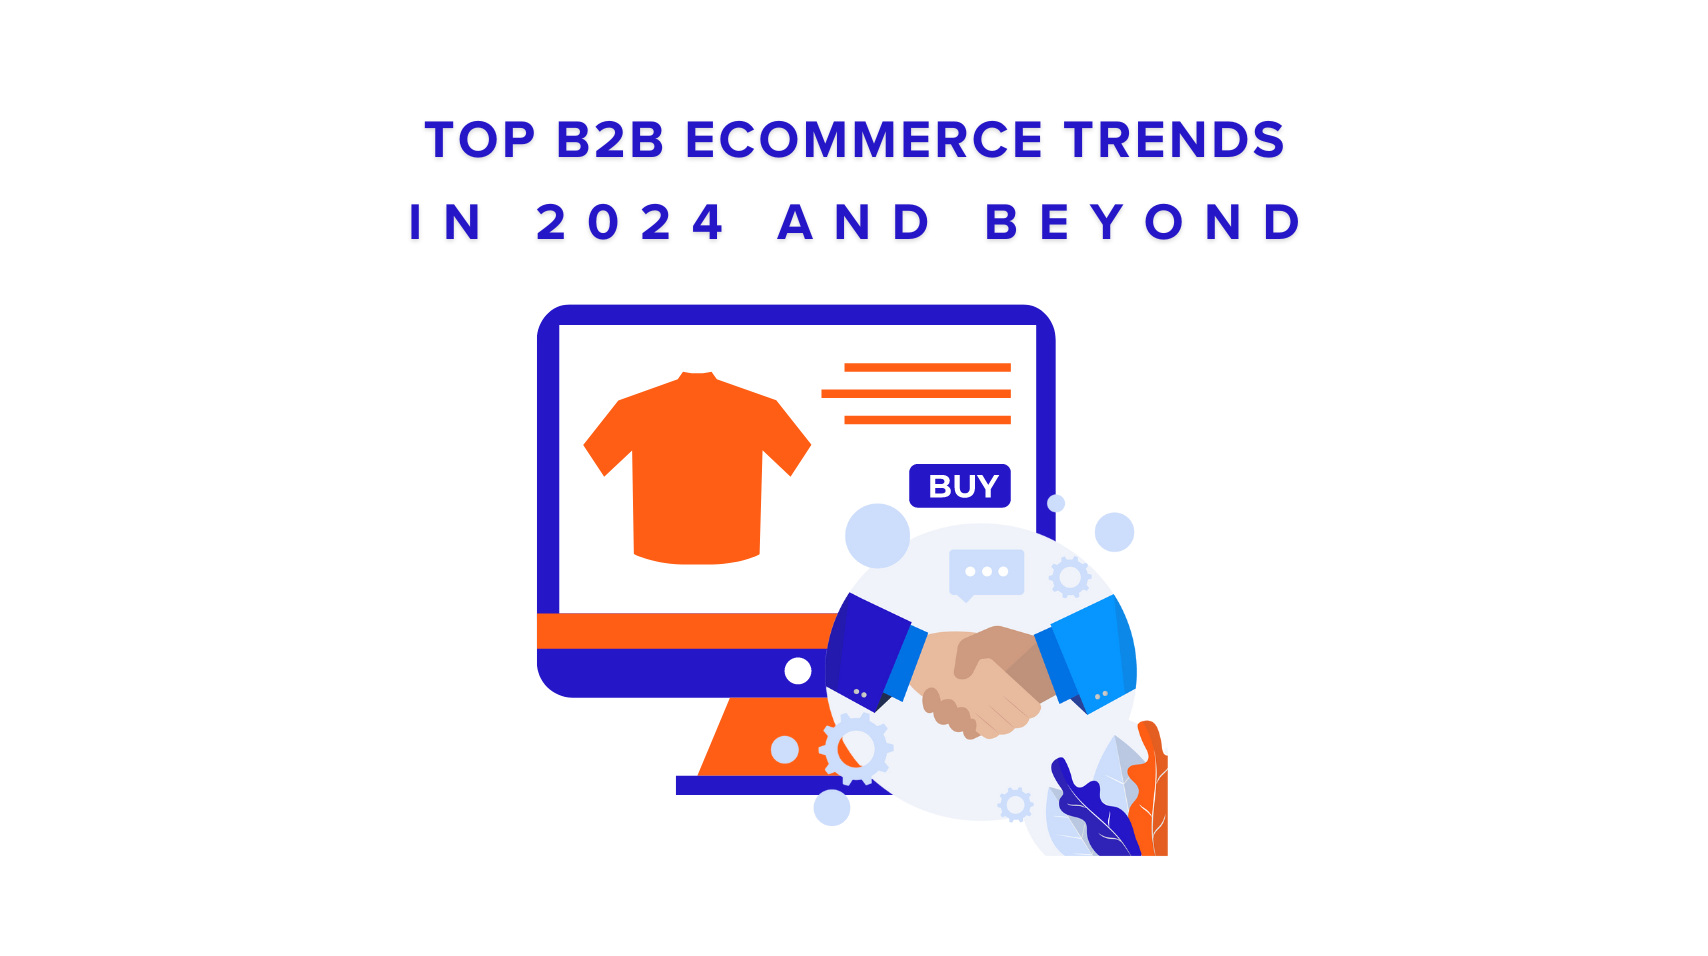 TOP B2B ECOMMERCE TRENDS IN 2024 AND BEYOND